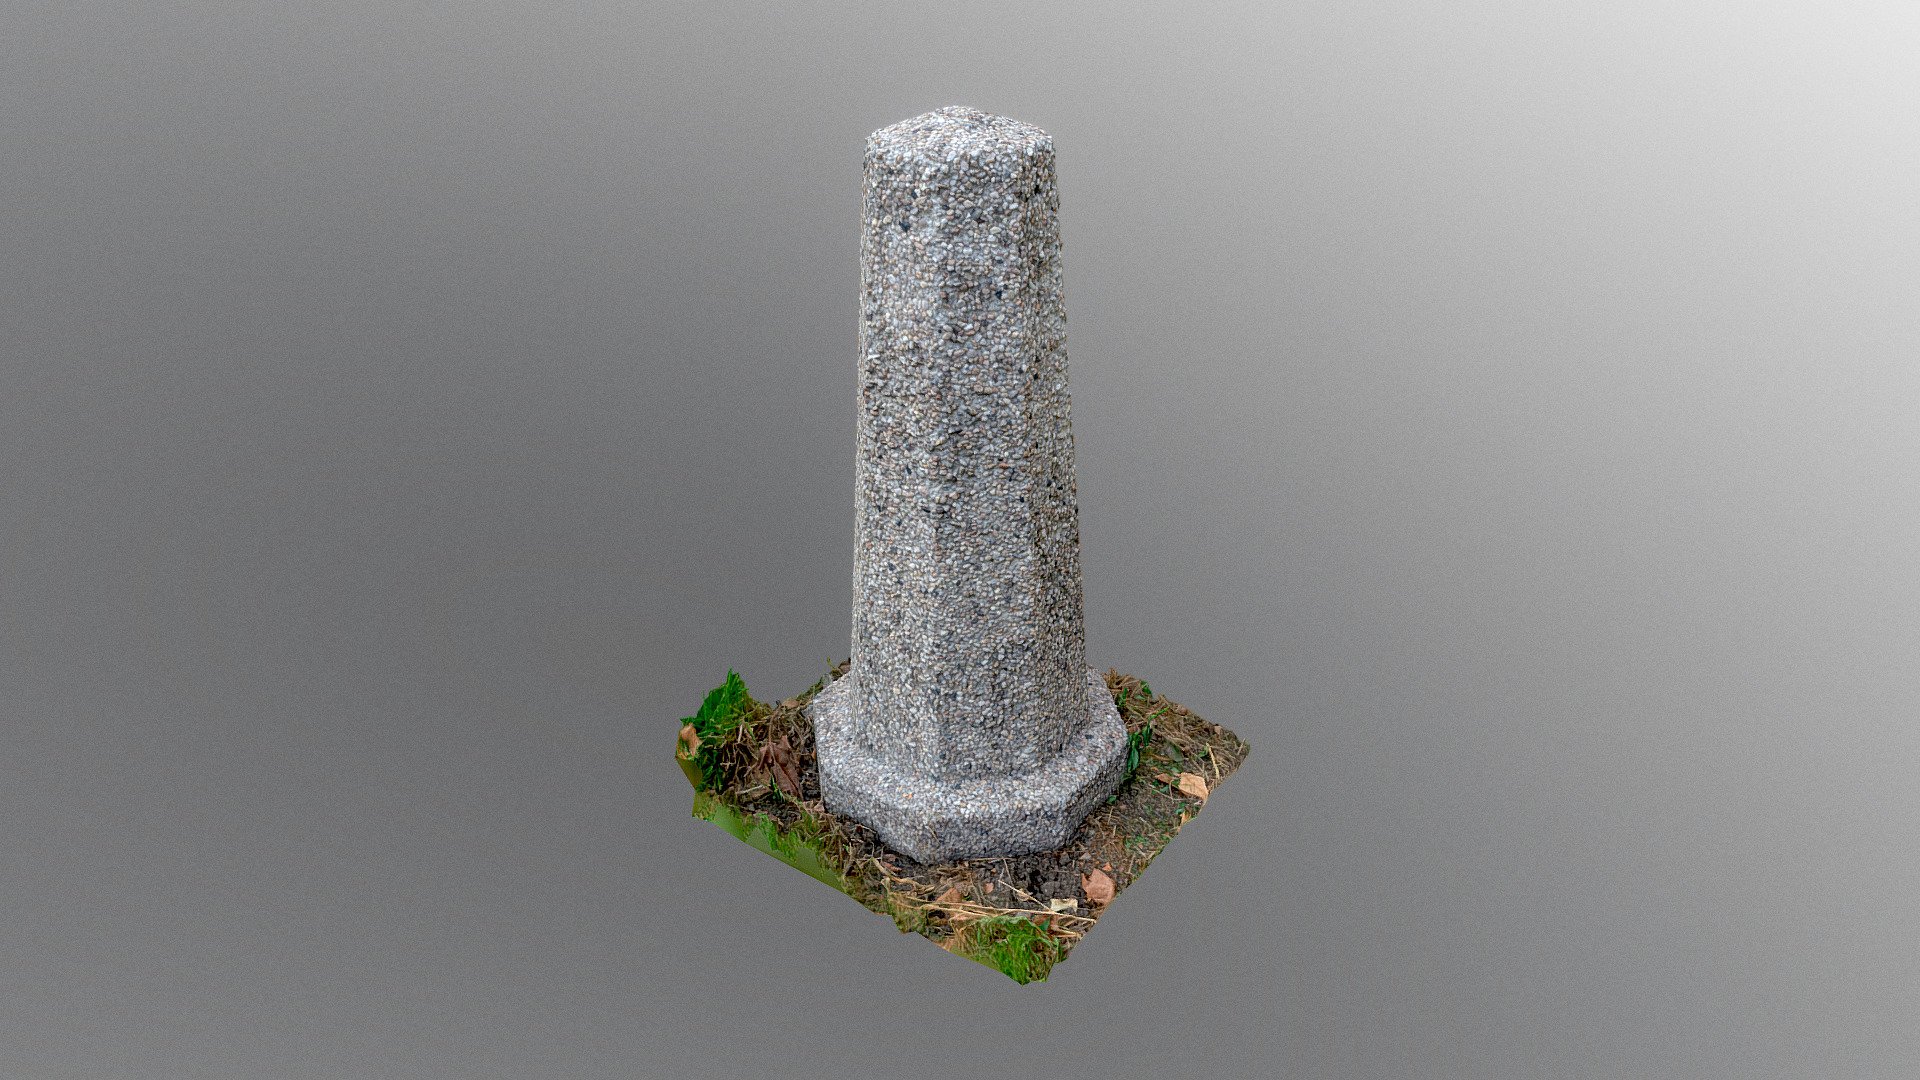 Bollard coated with small stones